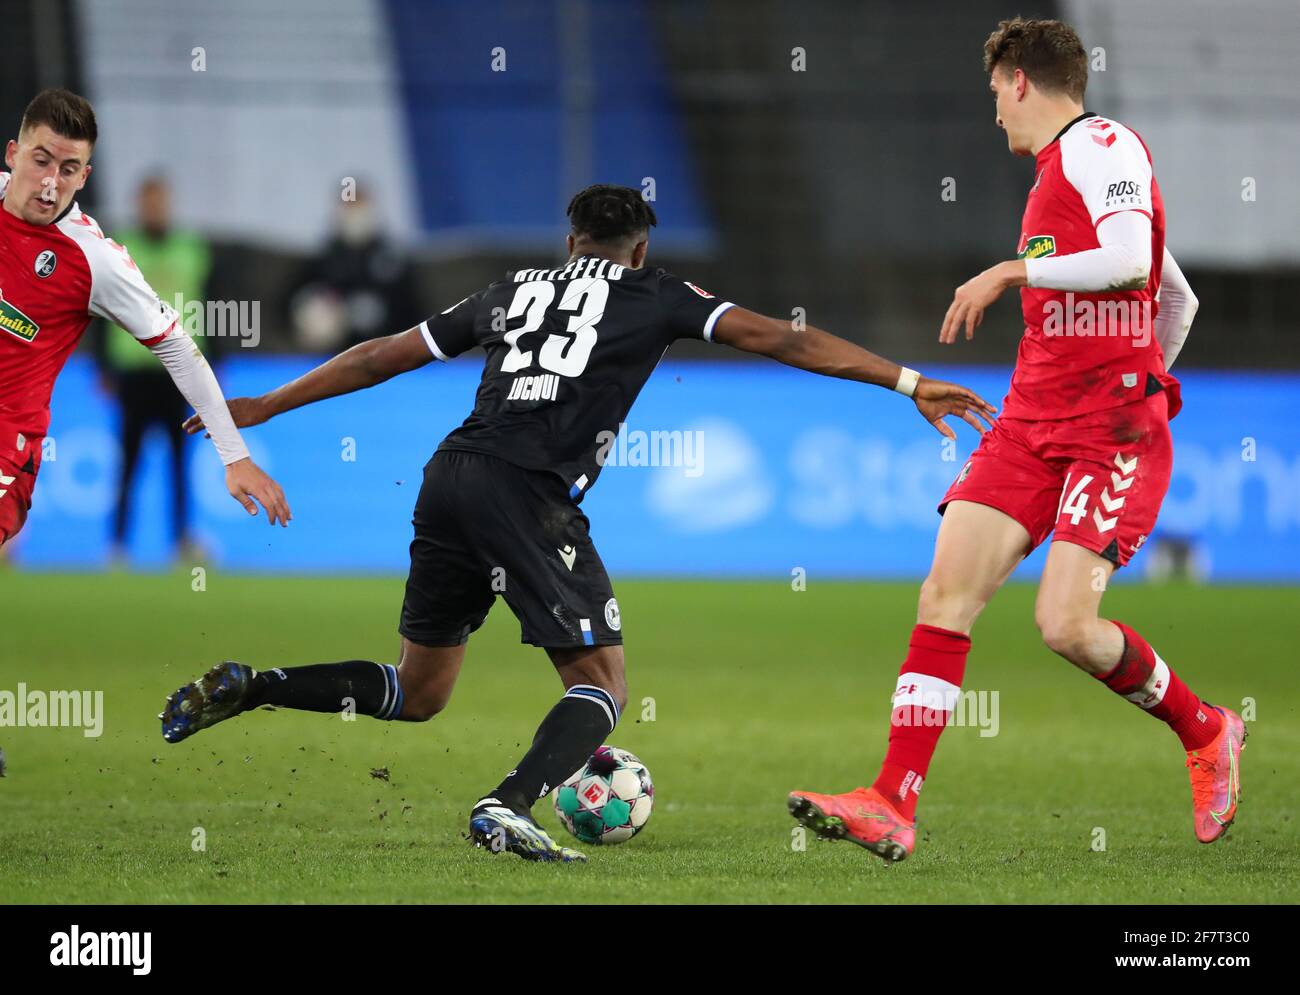 Bielefeld, Germany. 09th Apr, 2021. Football: Bundesliga, Arminia Bielefeld - SC Freiburg, Matchday 28 at Schüco Arena. Freiburg's Baptiste Santamaría and Freiburg's Guus Til (r) in action against Bielefeld's Anderson Lucoqui. IMPORTANT NOTE: In accordance with the regulations of the DFL Deutsche Fußball Liga and the DFB Deutscher Fußball-Bund, it is prohibited to use or have used photographs taken in the stadium and/or of the match in the form of sequence pictures and/or video-like photo series. Credit: Friso Gentsch/dpa/Alamy Live News Stock Photo